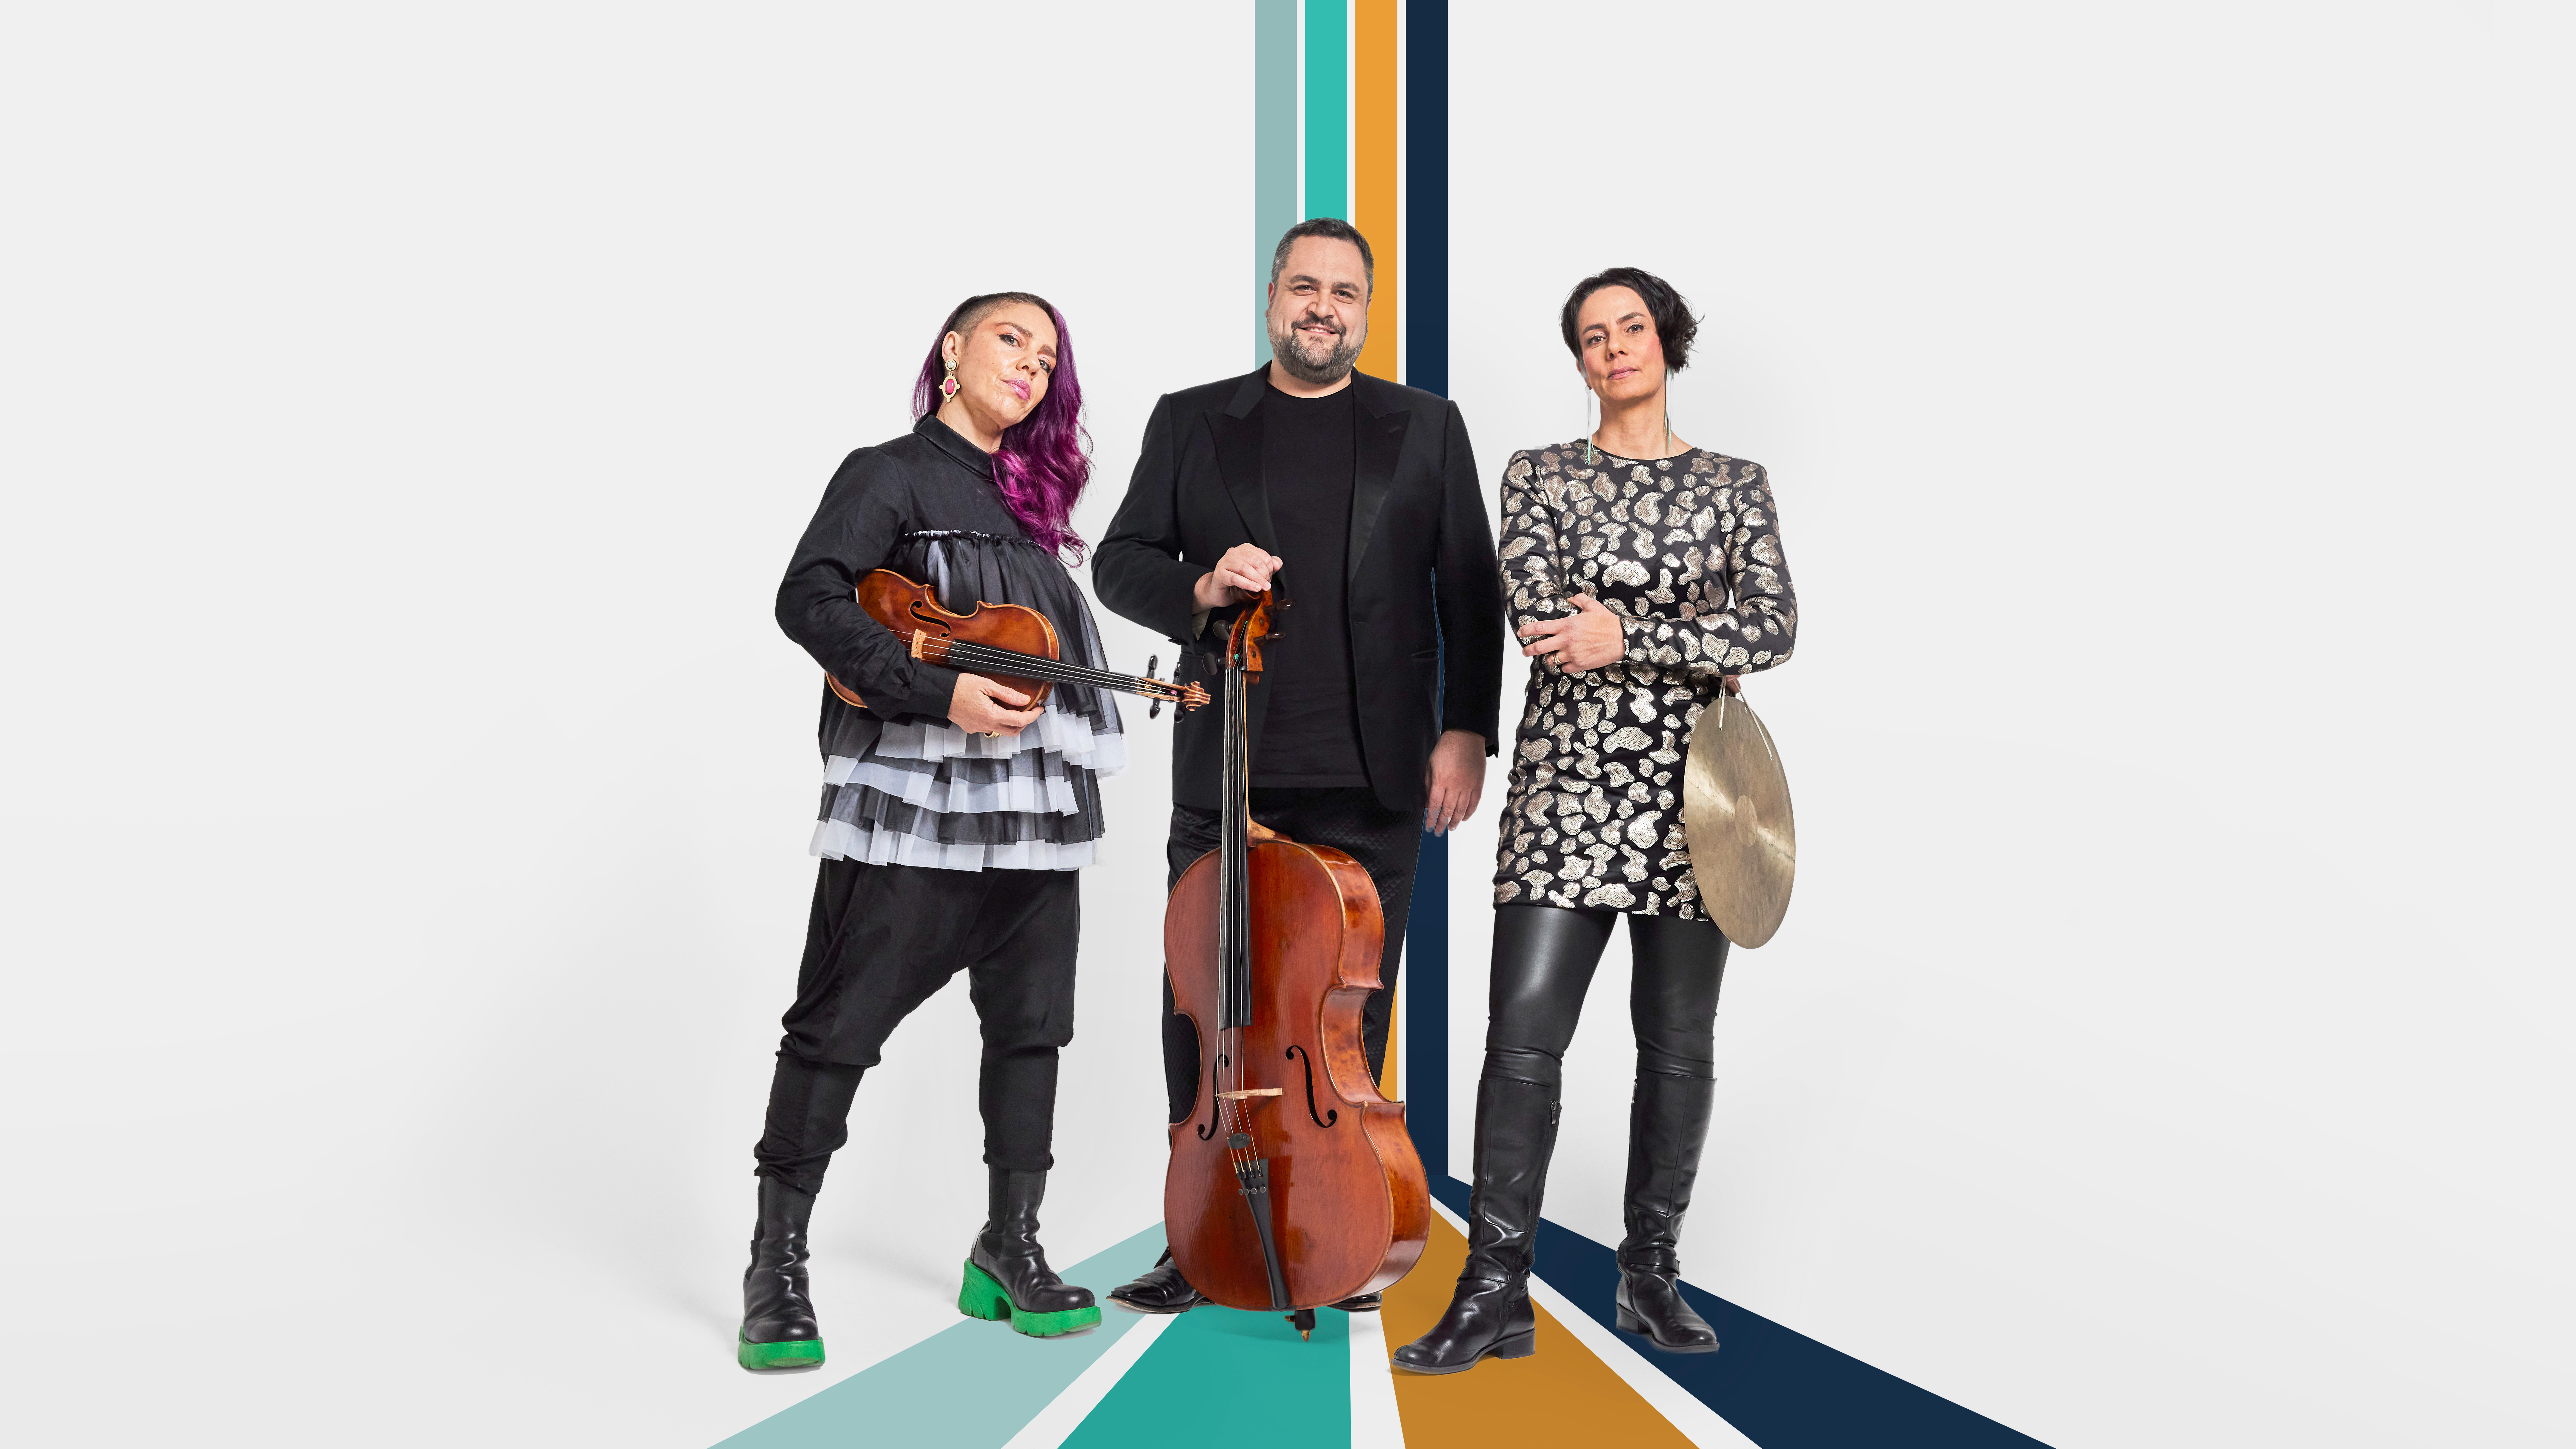 Two women and one man pose for a picture holding a violin, cello and cymbol.